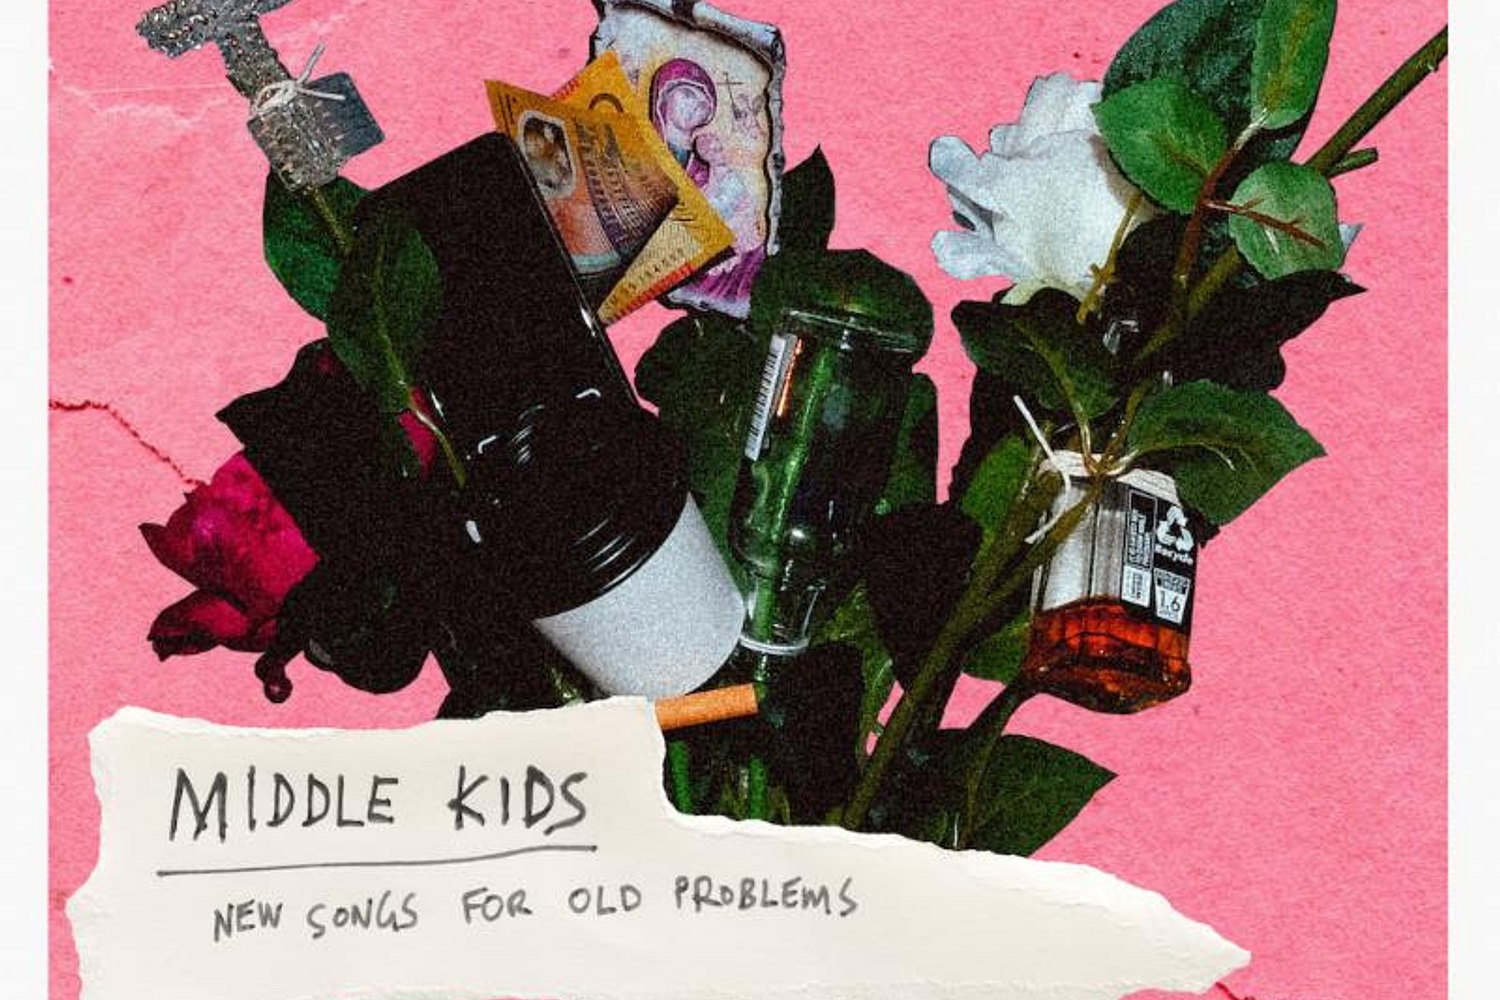 Middle Kids - New Songs For Old Problems